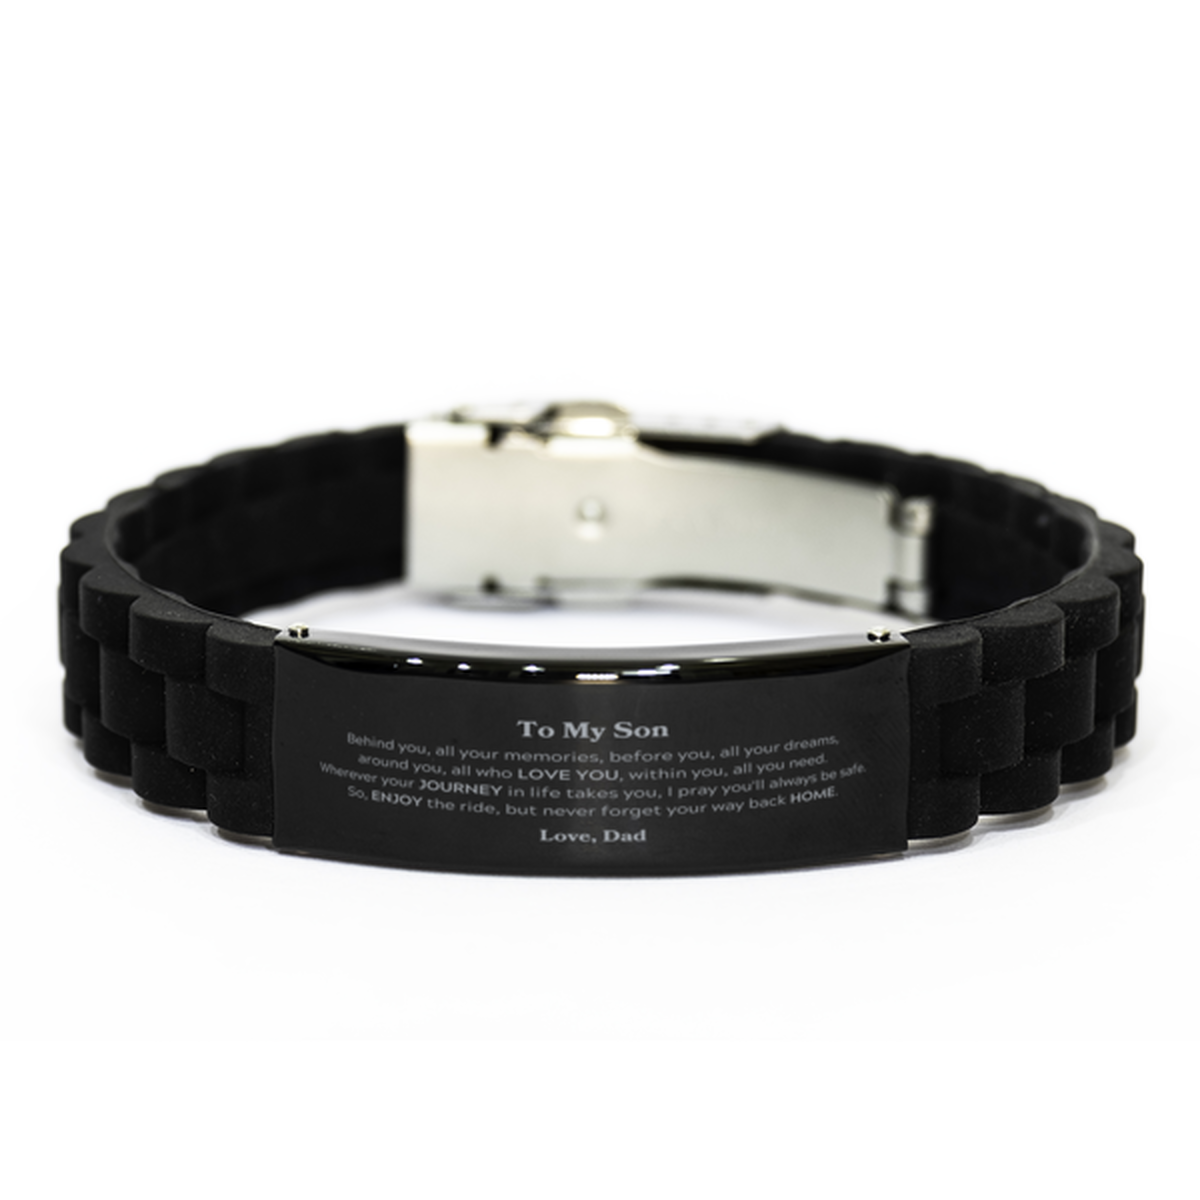 To My Son Graduation Gifts from Dad, Son Black Glidelock Clasp Bracelet Christmas Birthday Gifts for Son Behind you, all your memories, before you, all your dreams. Love, Dad